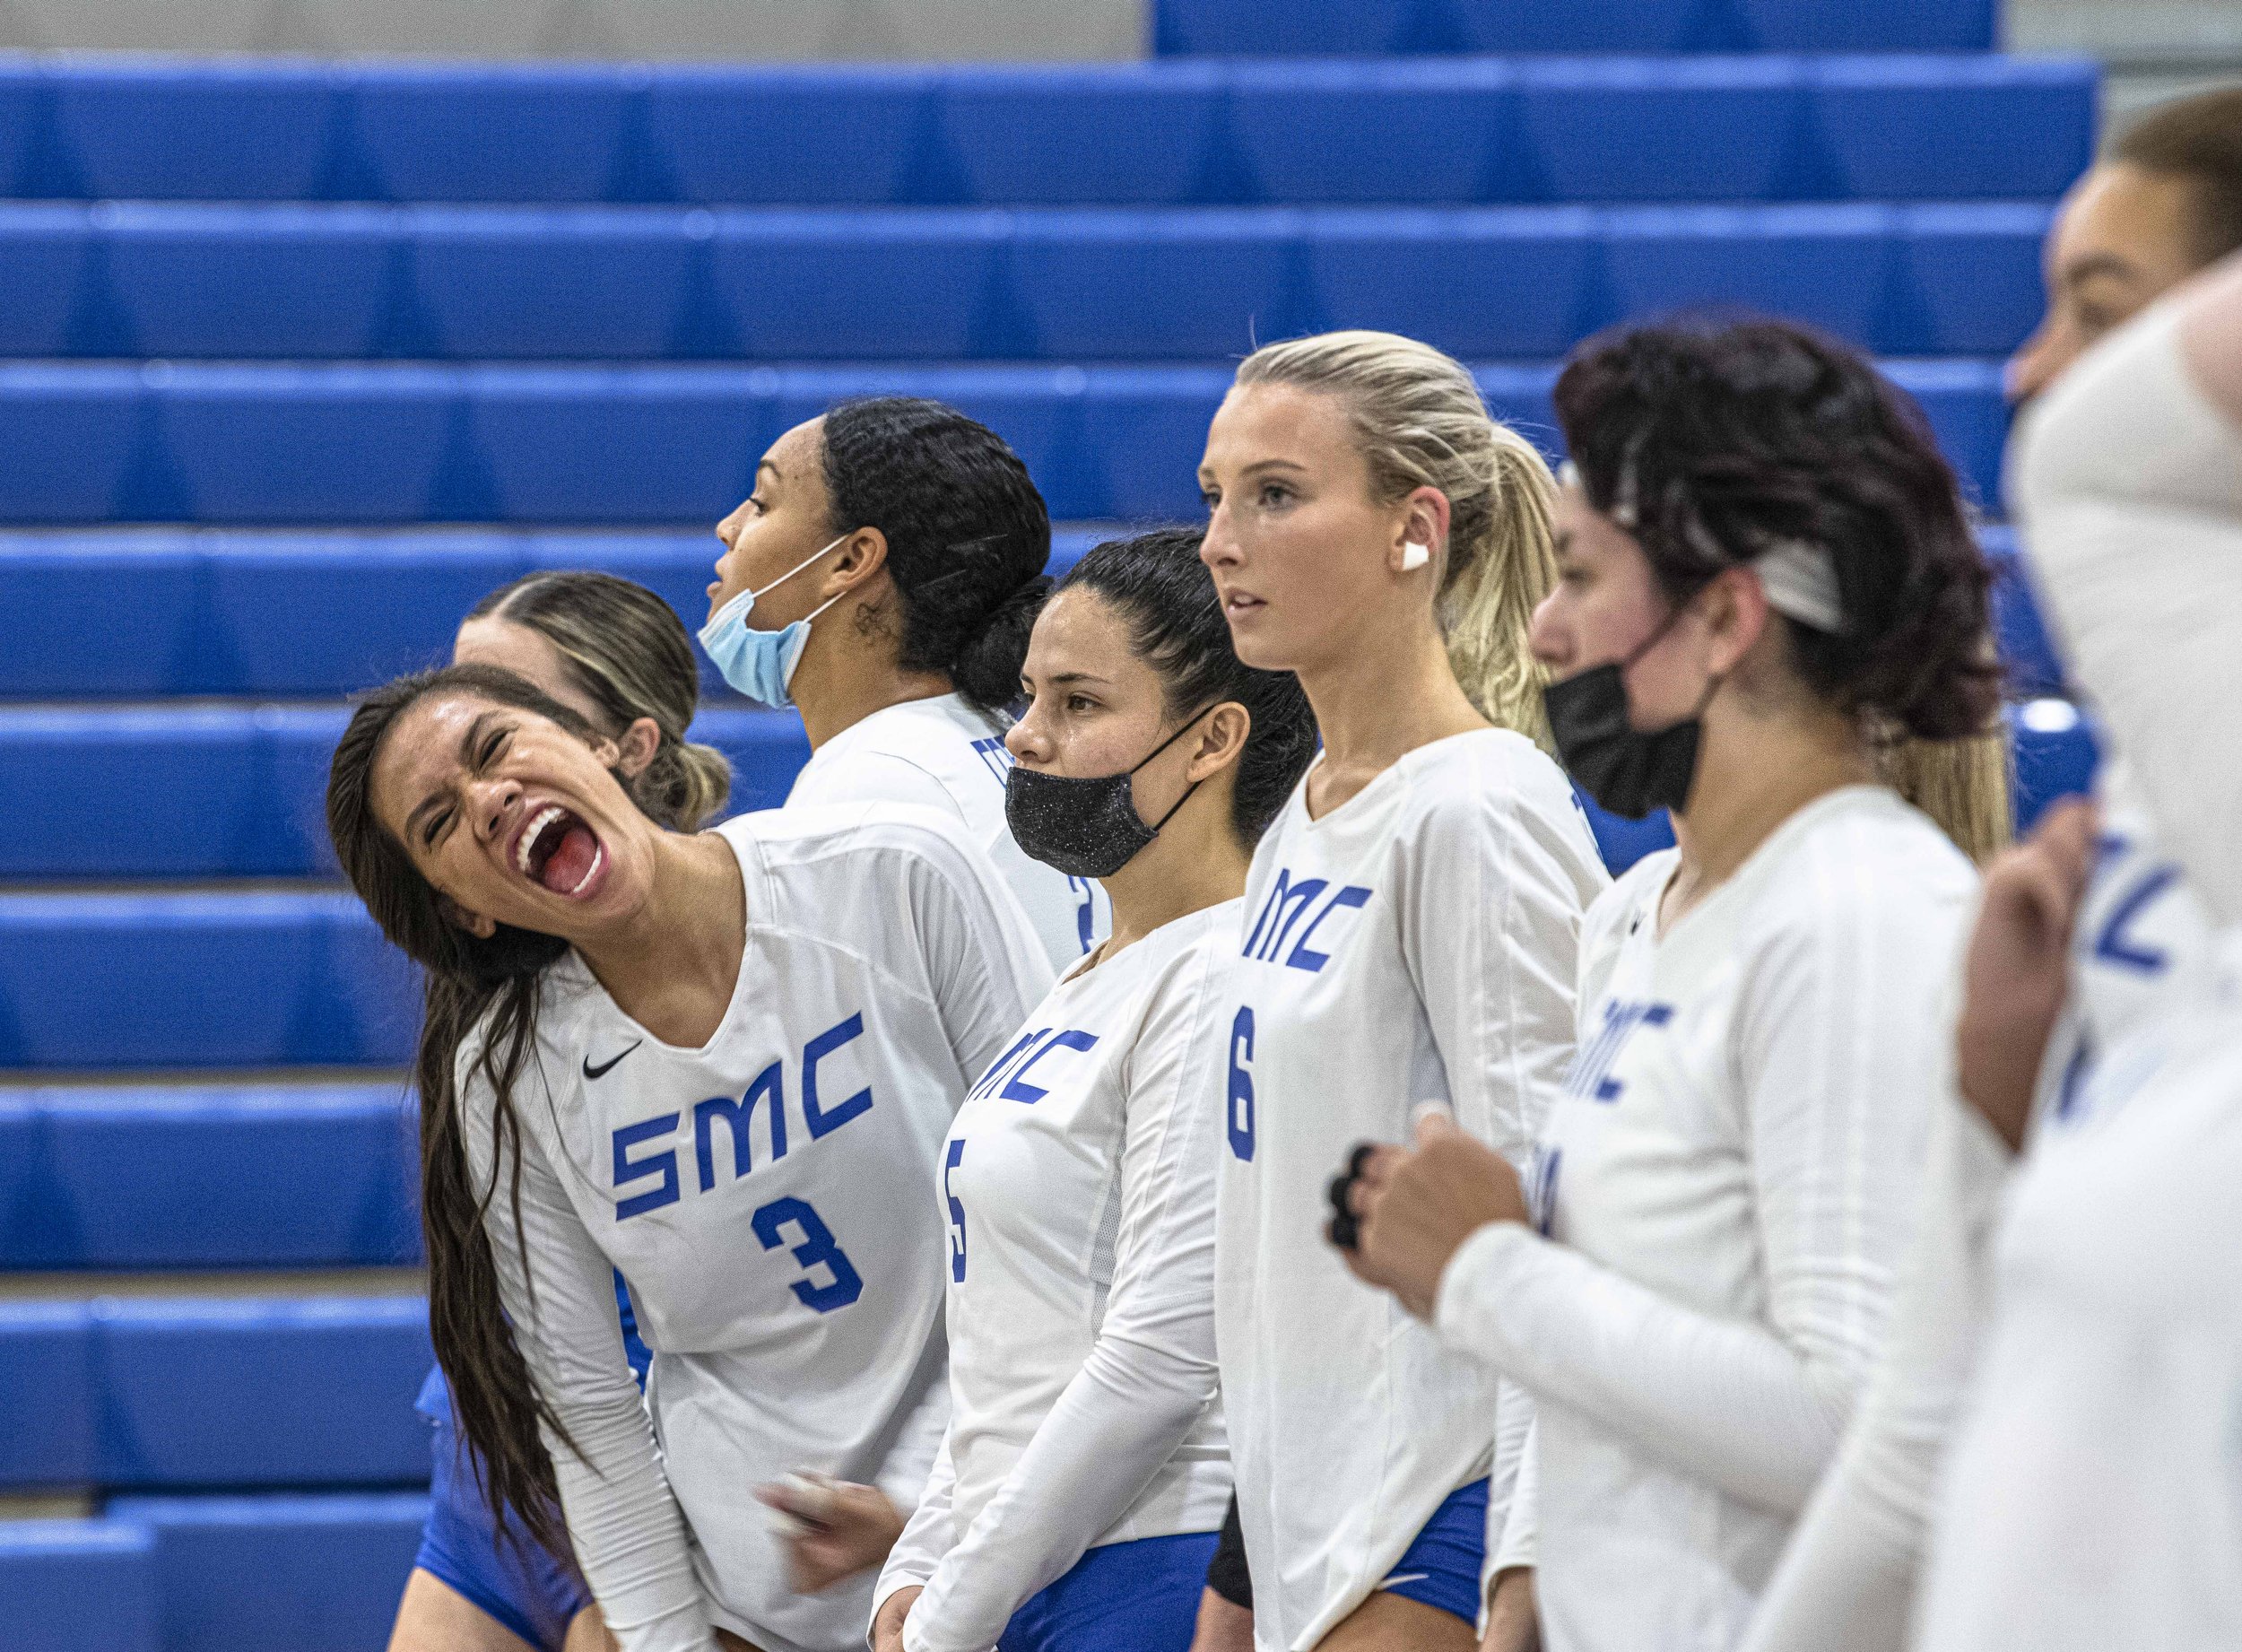  Santa Monica College Corsairs freshman Lupe Pulotu (3) yells in excitement as teams line up to announce staters before their game with Citrus College Wednesday, Nov. 3, 2021 at Santa Monica College in Santa Monica, Calif. 